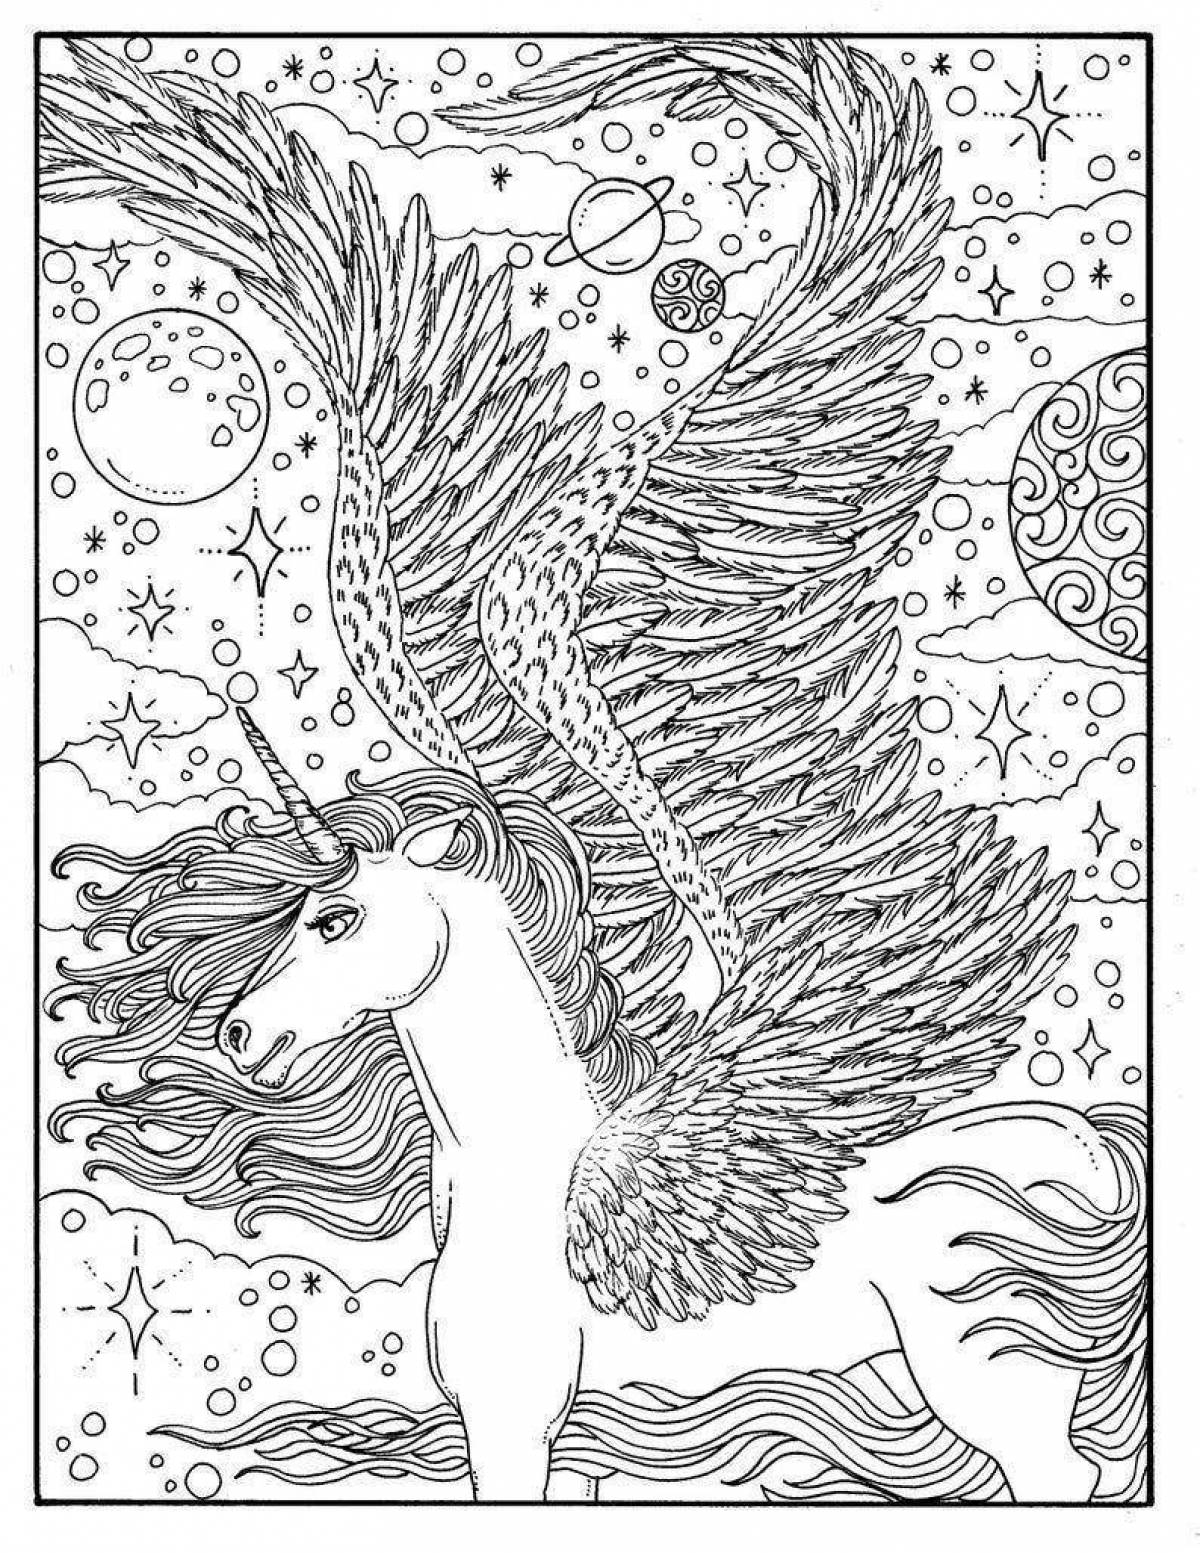 Radiant coloring page antistress unicorn